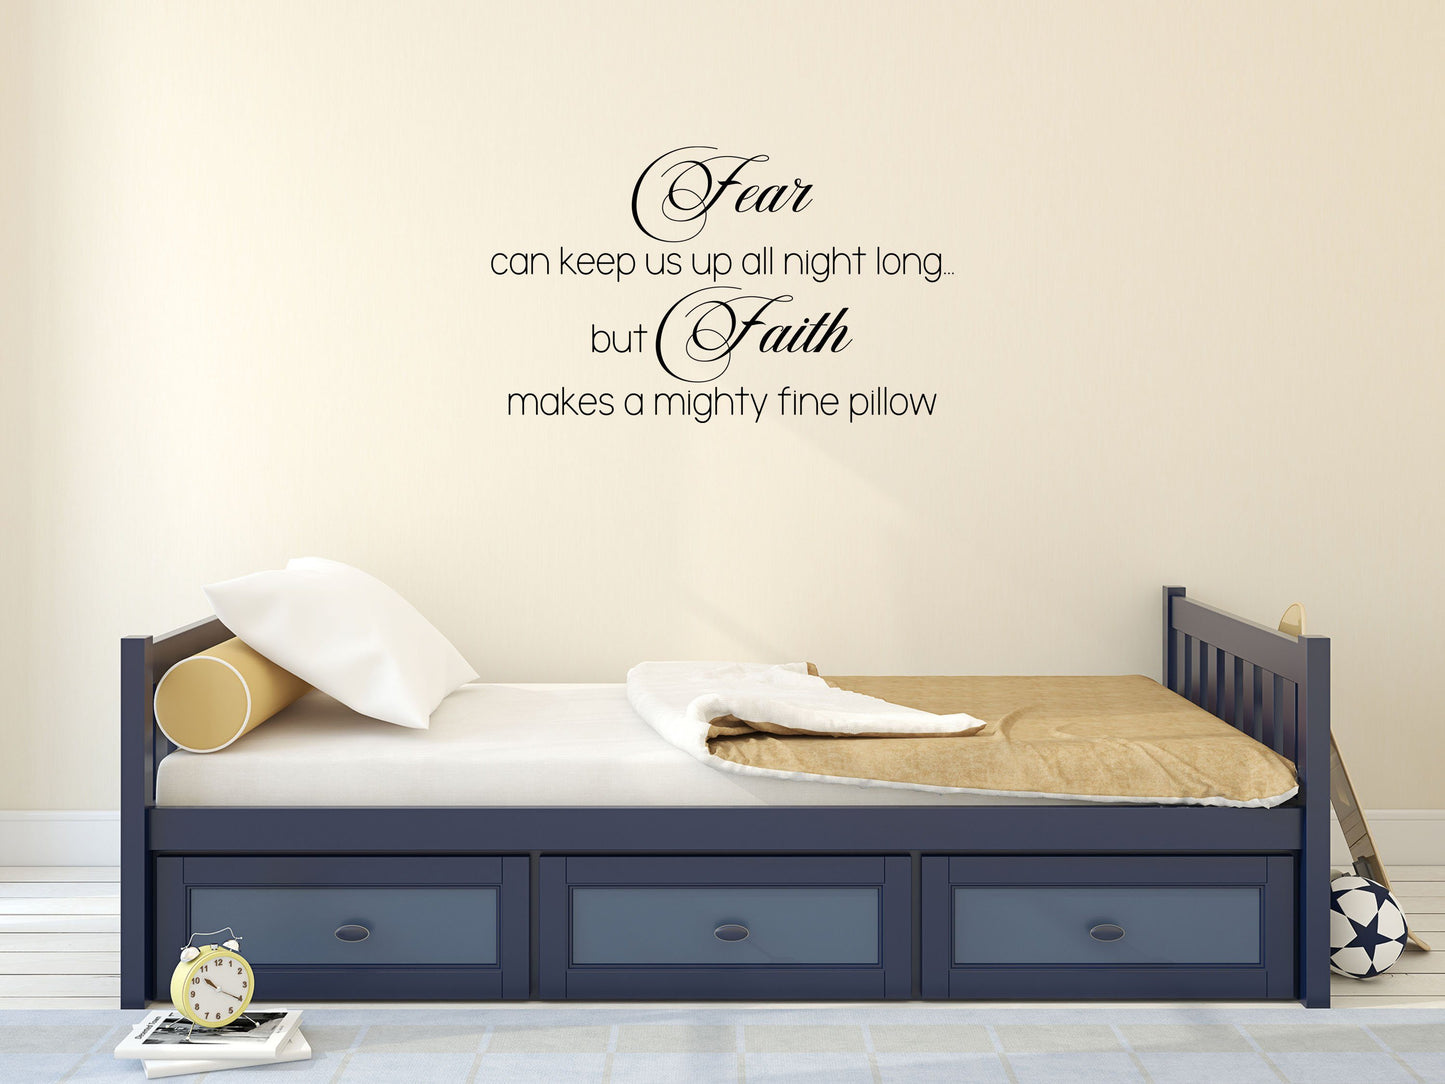 Fear Can Keep Us Up All Night - Inspirational Wall Decals Vinyl Wall Decal Done 